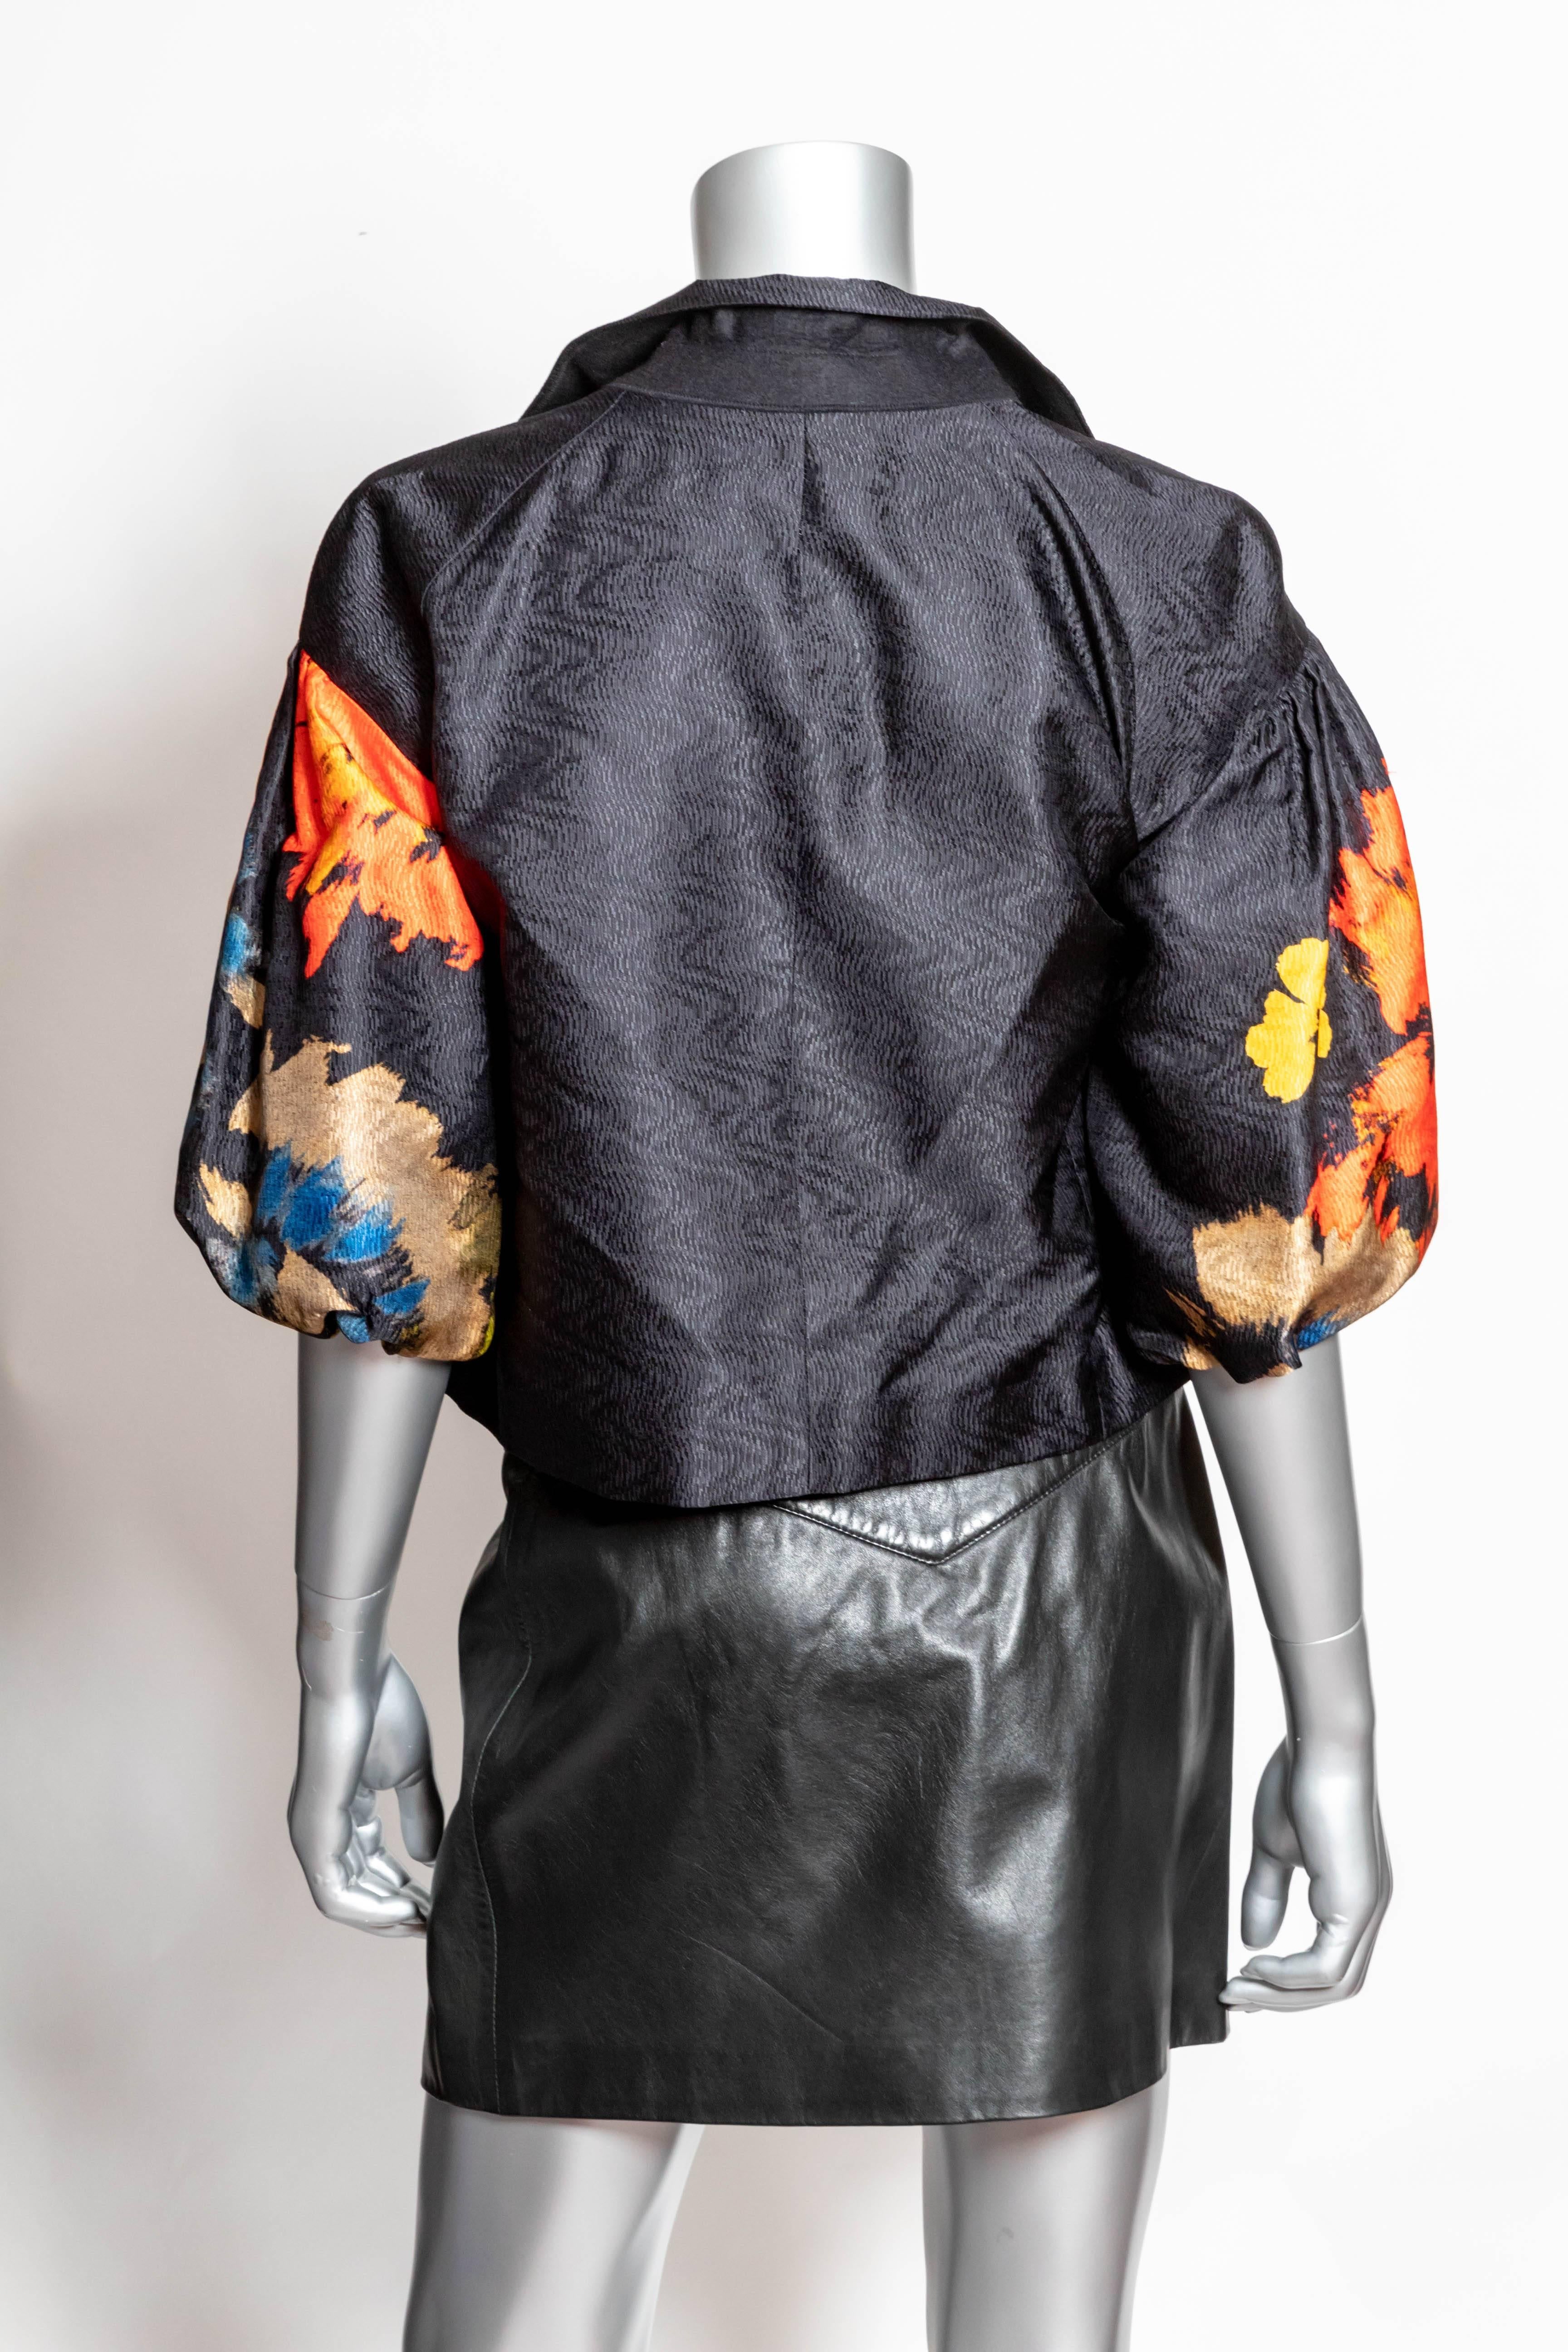 Stunning Dries Van Noten Black Silk Jacket with Drop Shoulder Elbow Length Balloon Style Sleeves 
This vintage jacket is in excellent condition.
Sleeve length from top of shoulder is 14 inches.
